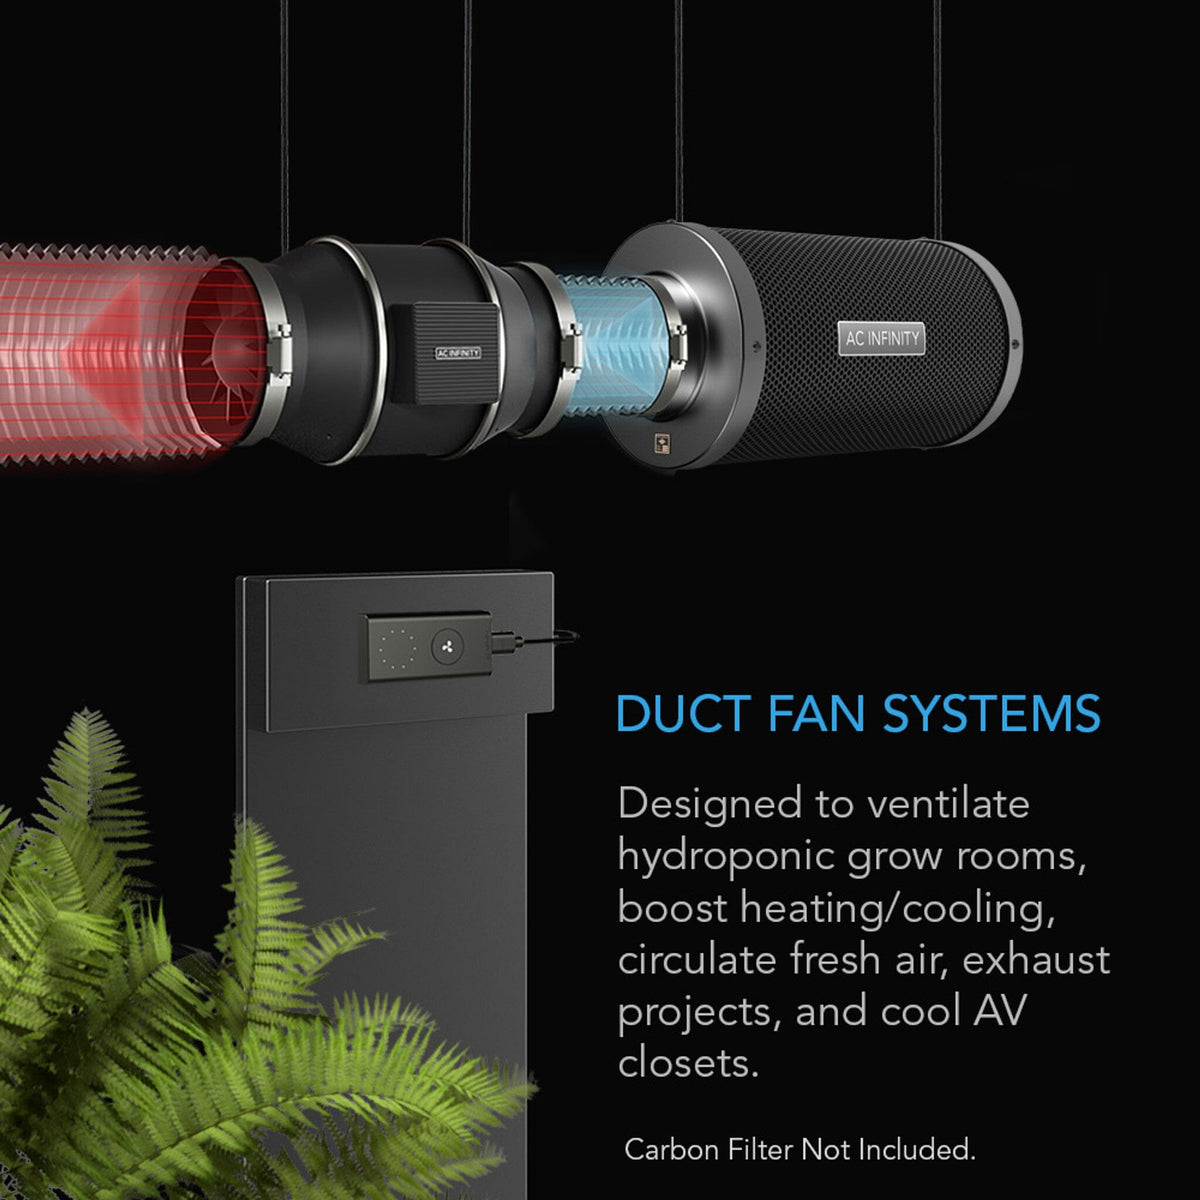 Duct Fan system for ventilating rooms and exhaust projects